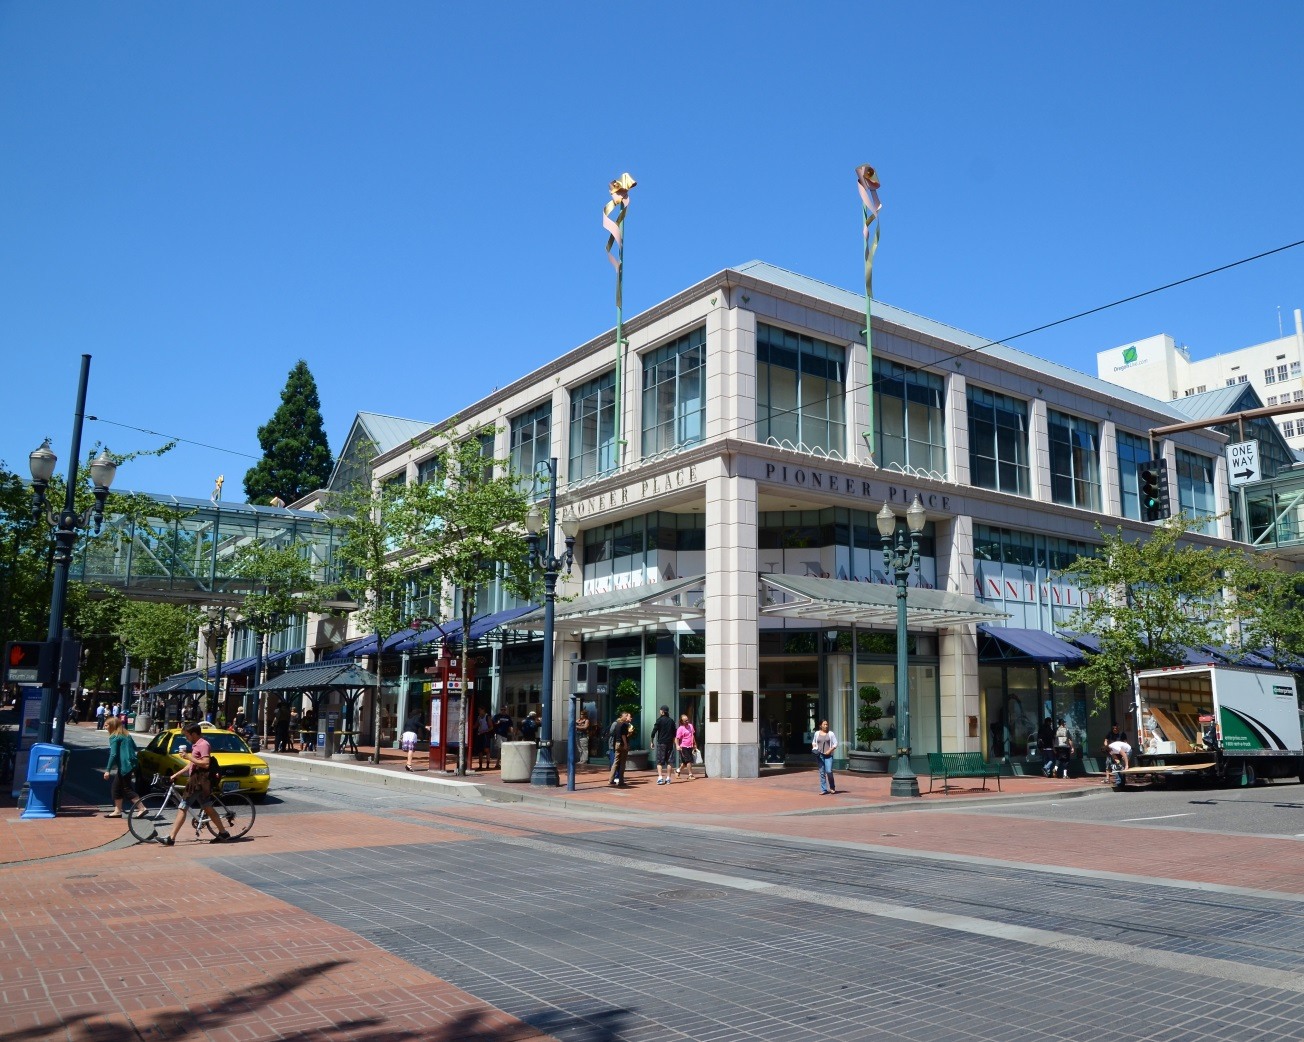 Pioneer Place | The Official Guide to Portland